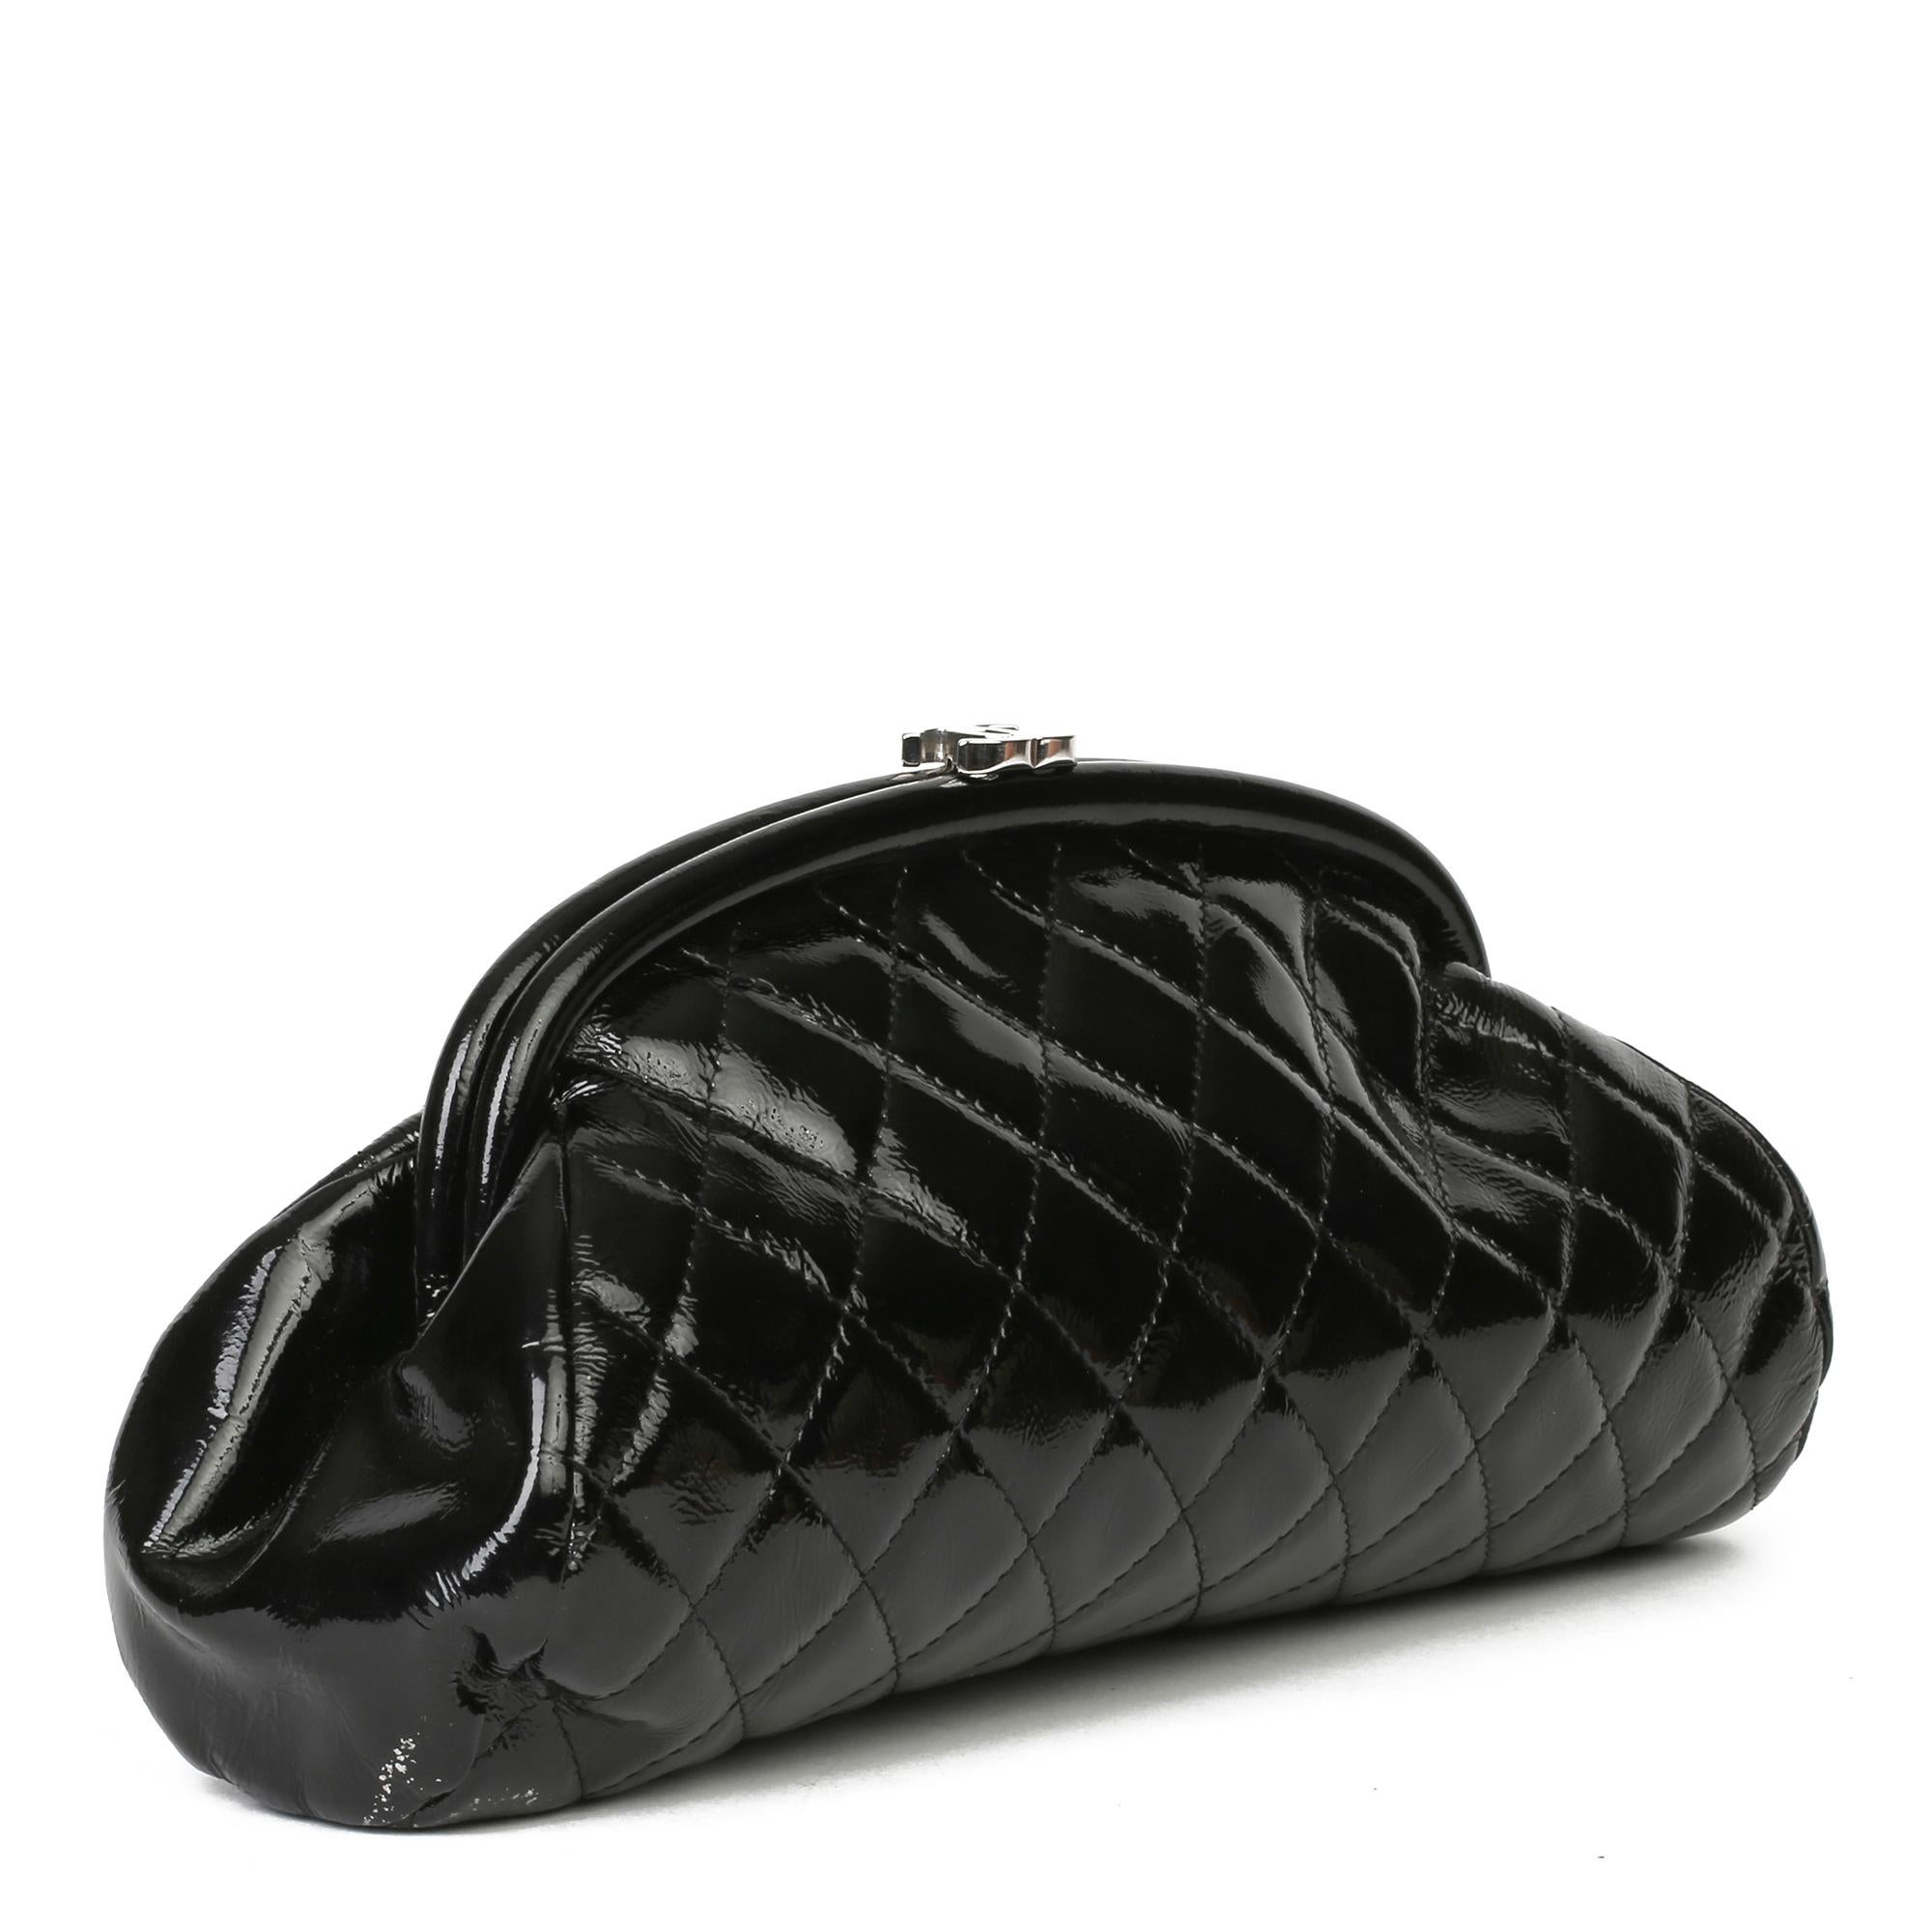 CHANEL
Black Quilted Aged Patent Leather Timeless Clutch

Xupes Reference: HB3916
Serial Number: 11057294
Age (Circa): 2007
Accompanied By: Chanel Dust Bag, Authenticity Card
Authenticity Details: Authenticity Card, Serial Sticker (Made in